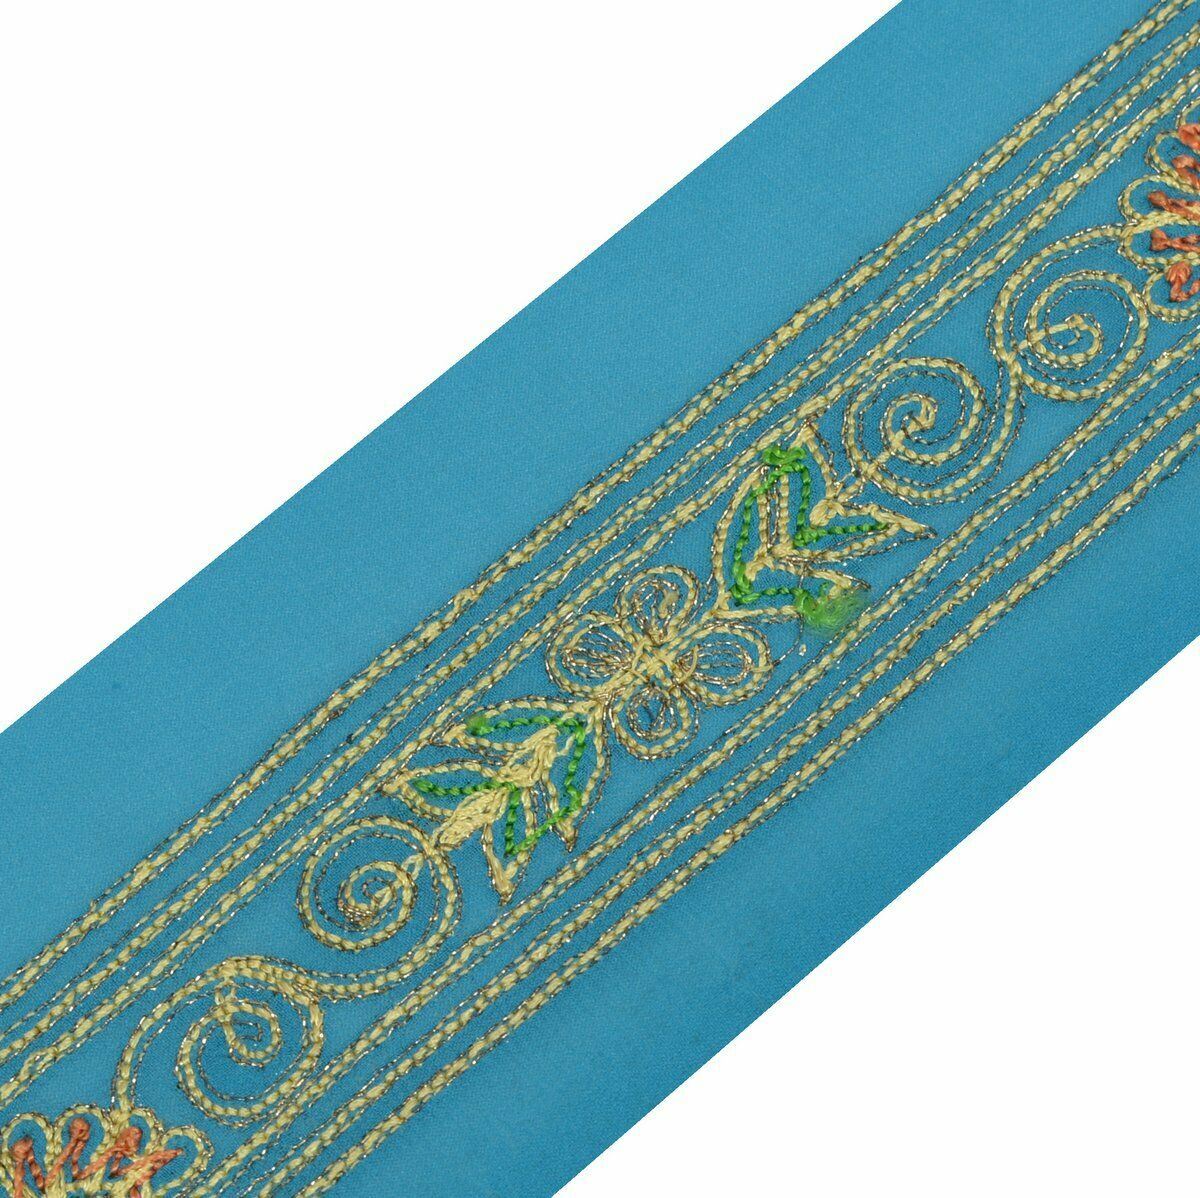 Vintage Saree Border Craft Trim Antique Lace Embroidered Turquoise Blue Ribbon